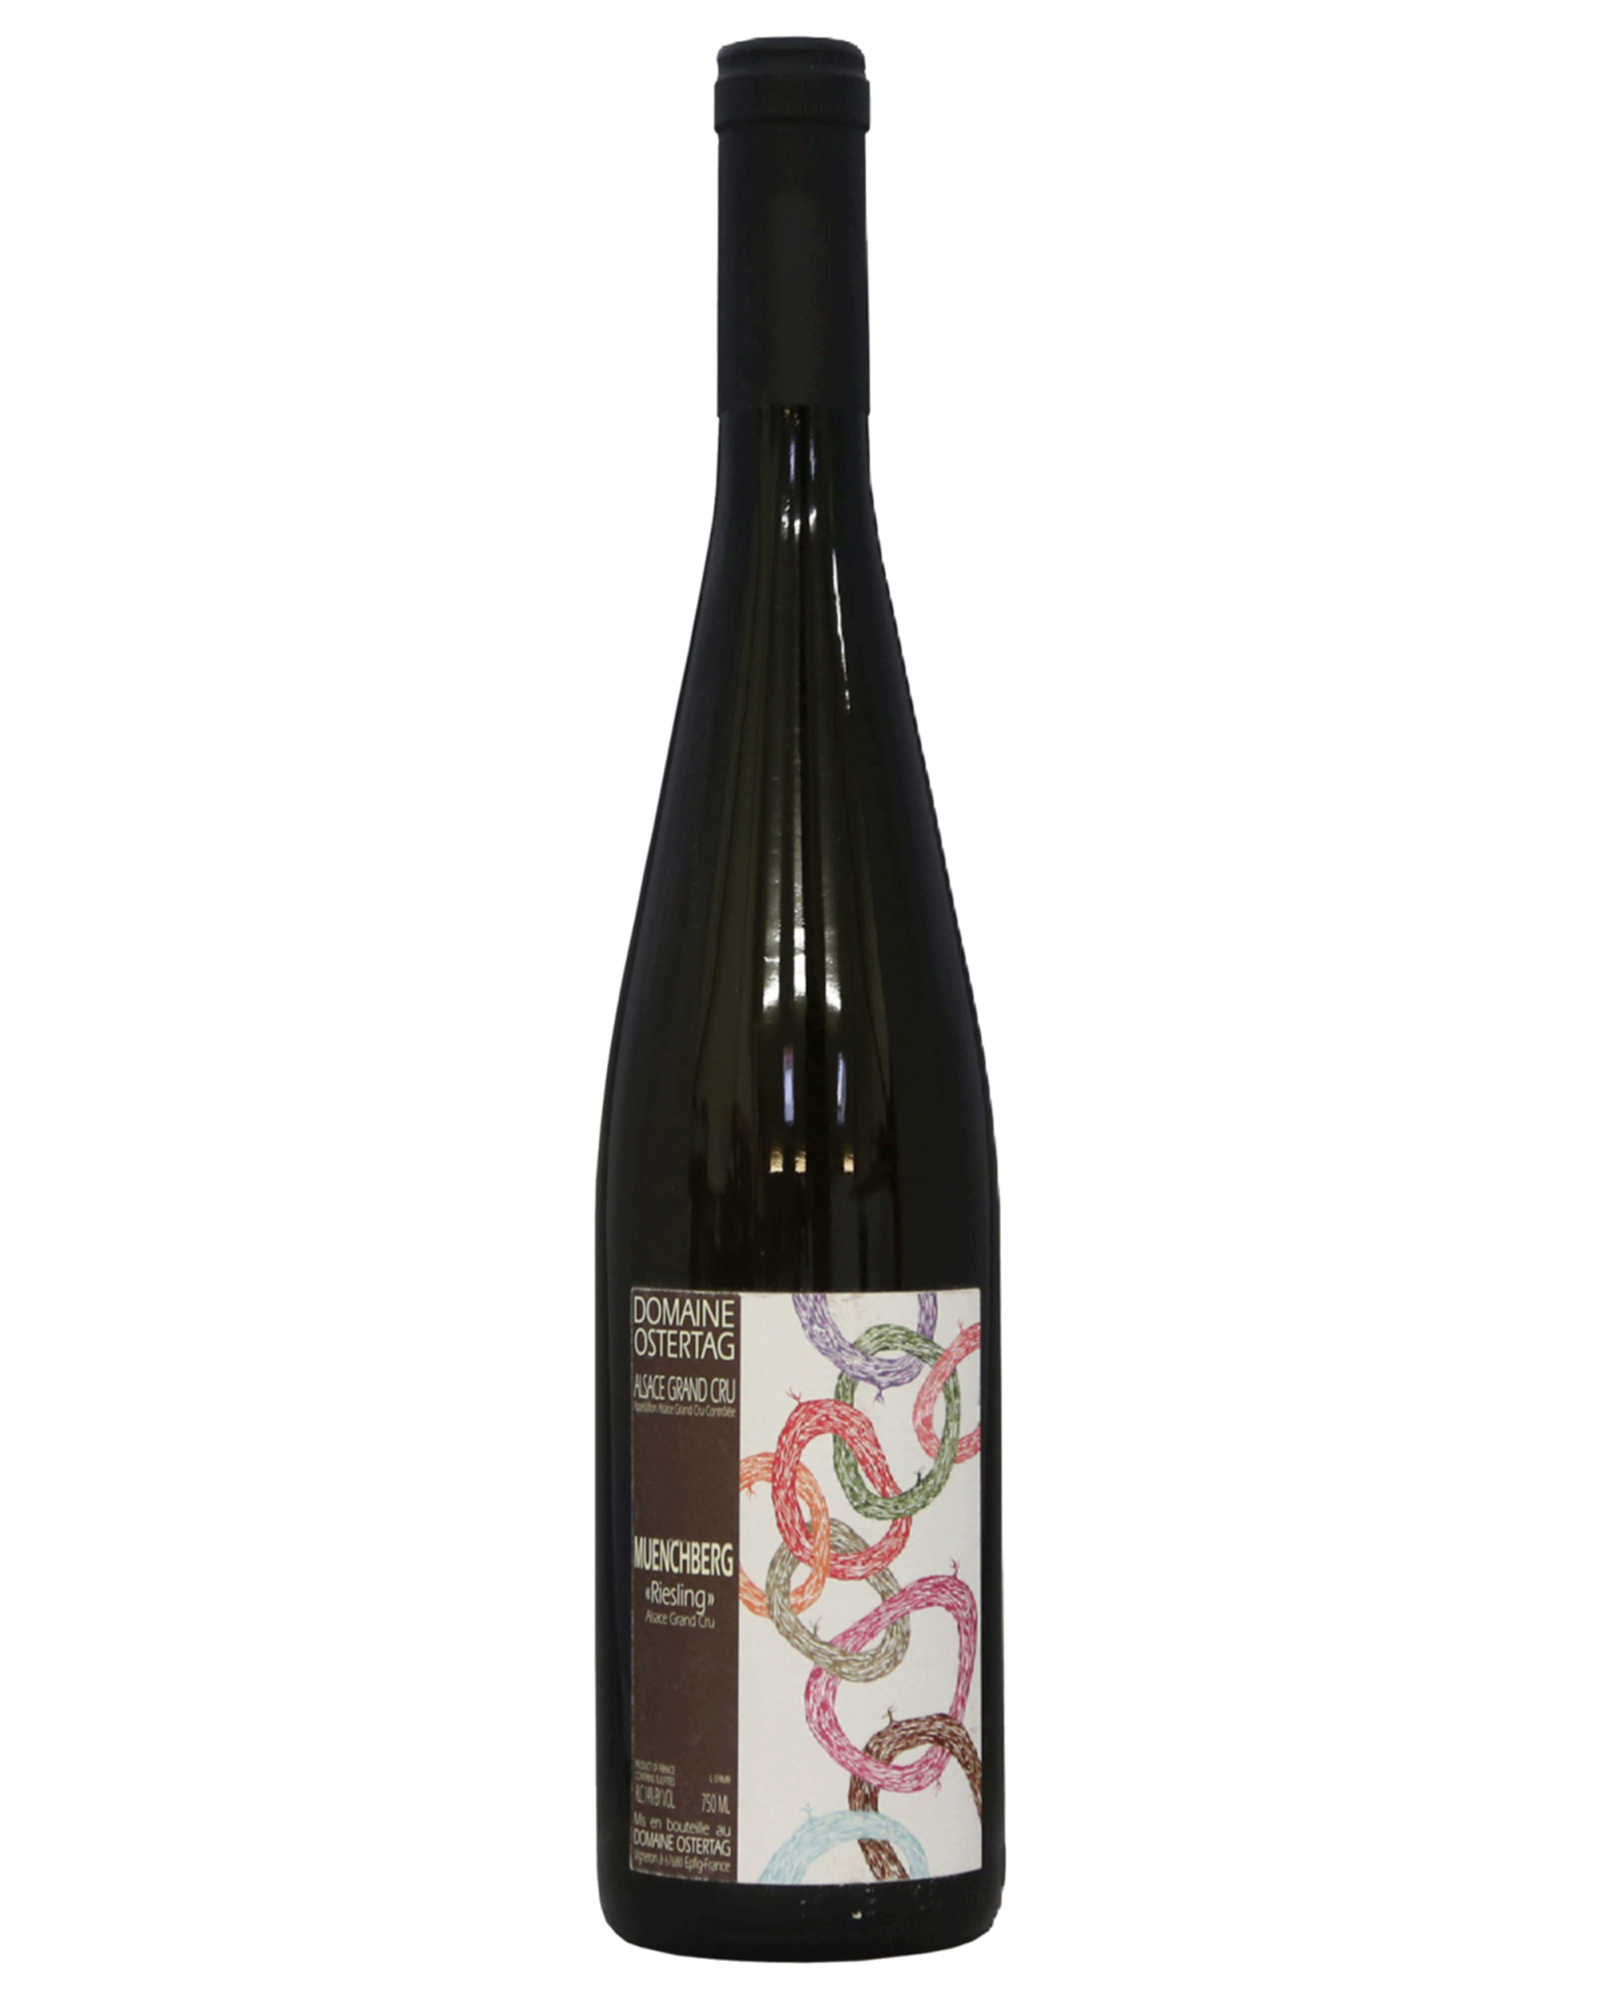 Domaine Ostertag Muenchberg Grand Cru